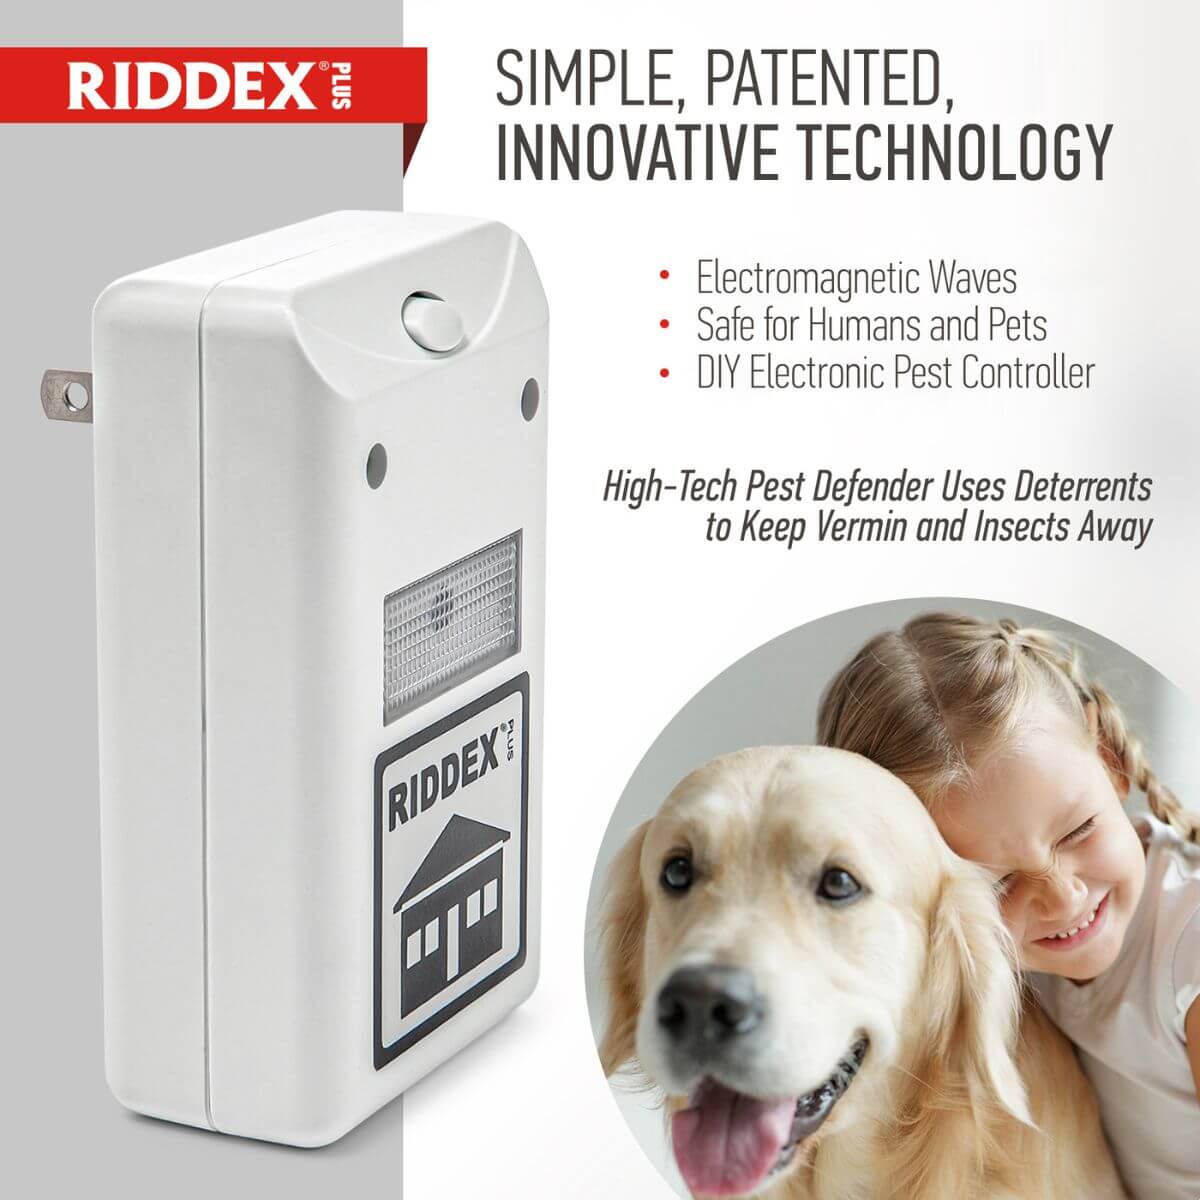 Riddex Plus: Electromagnetic waves, safe for humans and pets, patented technology